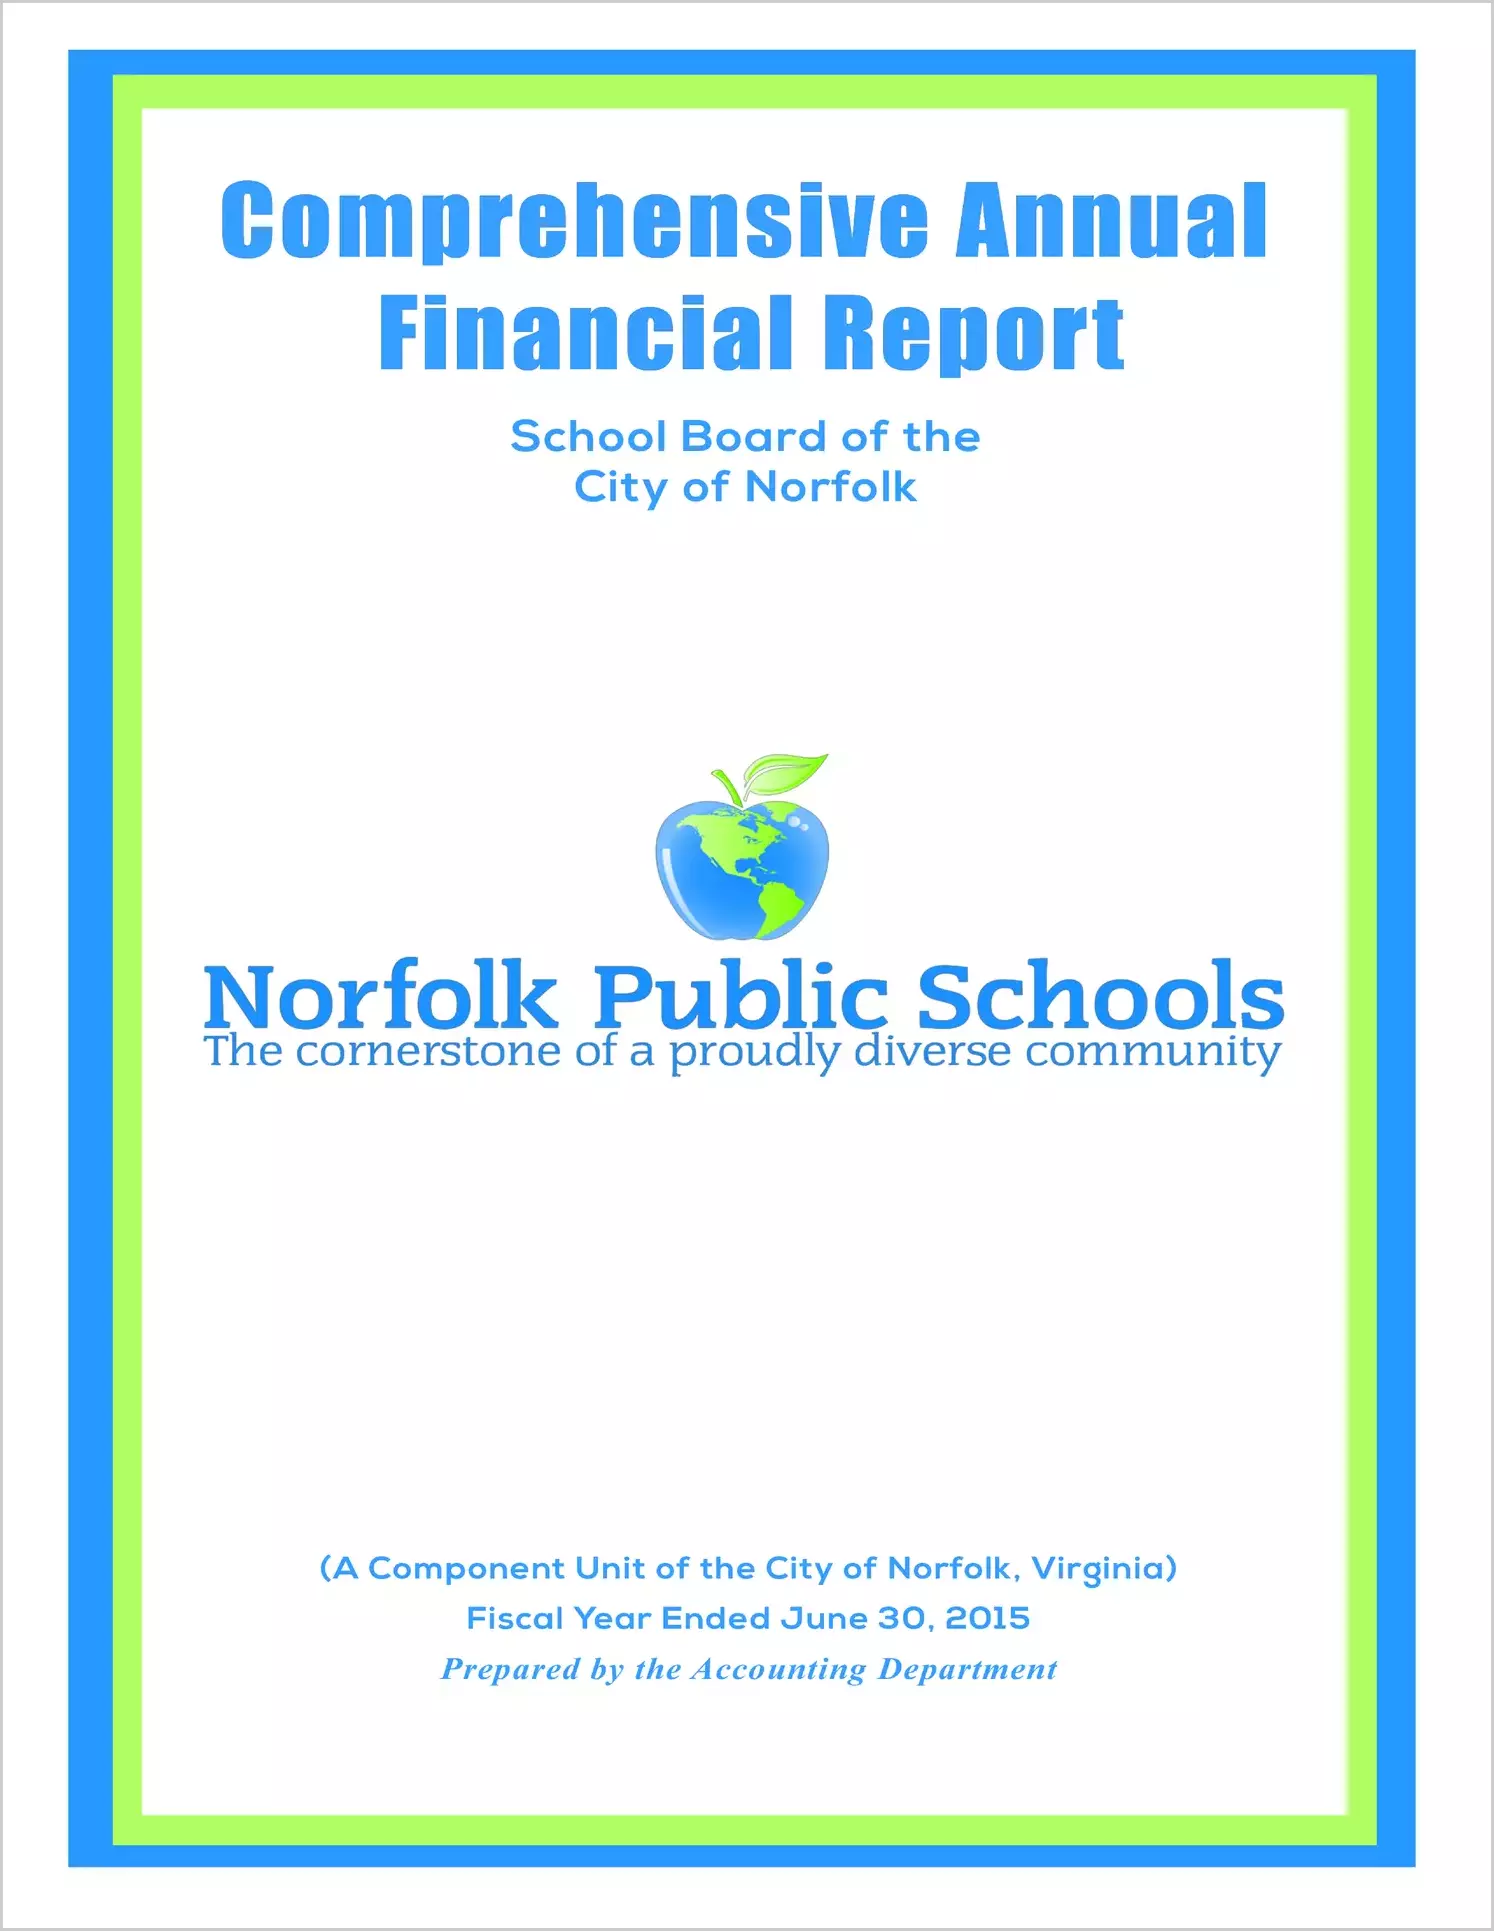 2015 Public Schools Annual Financial Report for City of Norfolk